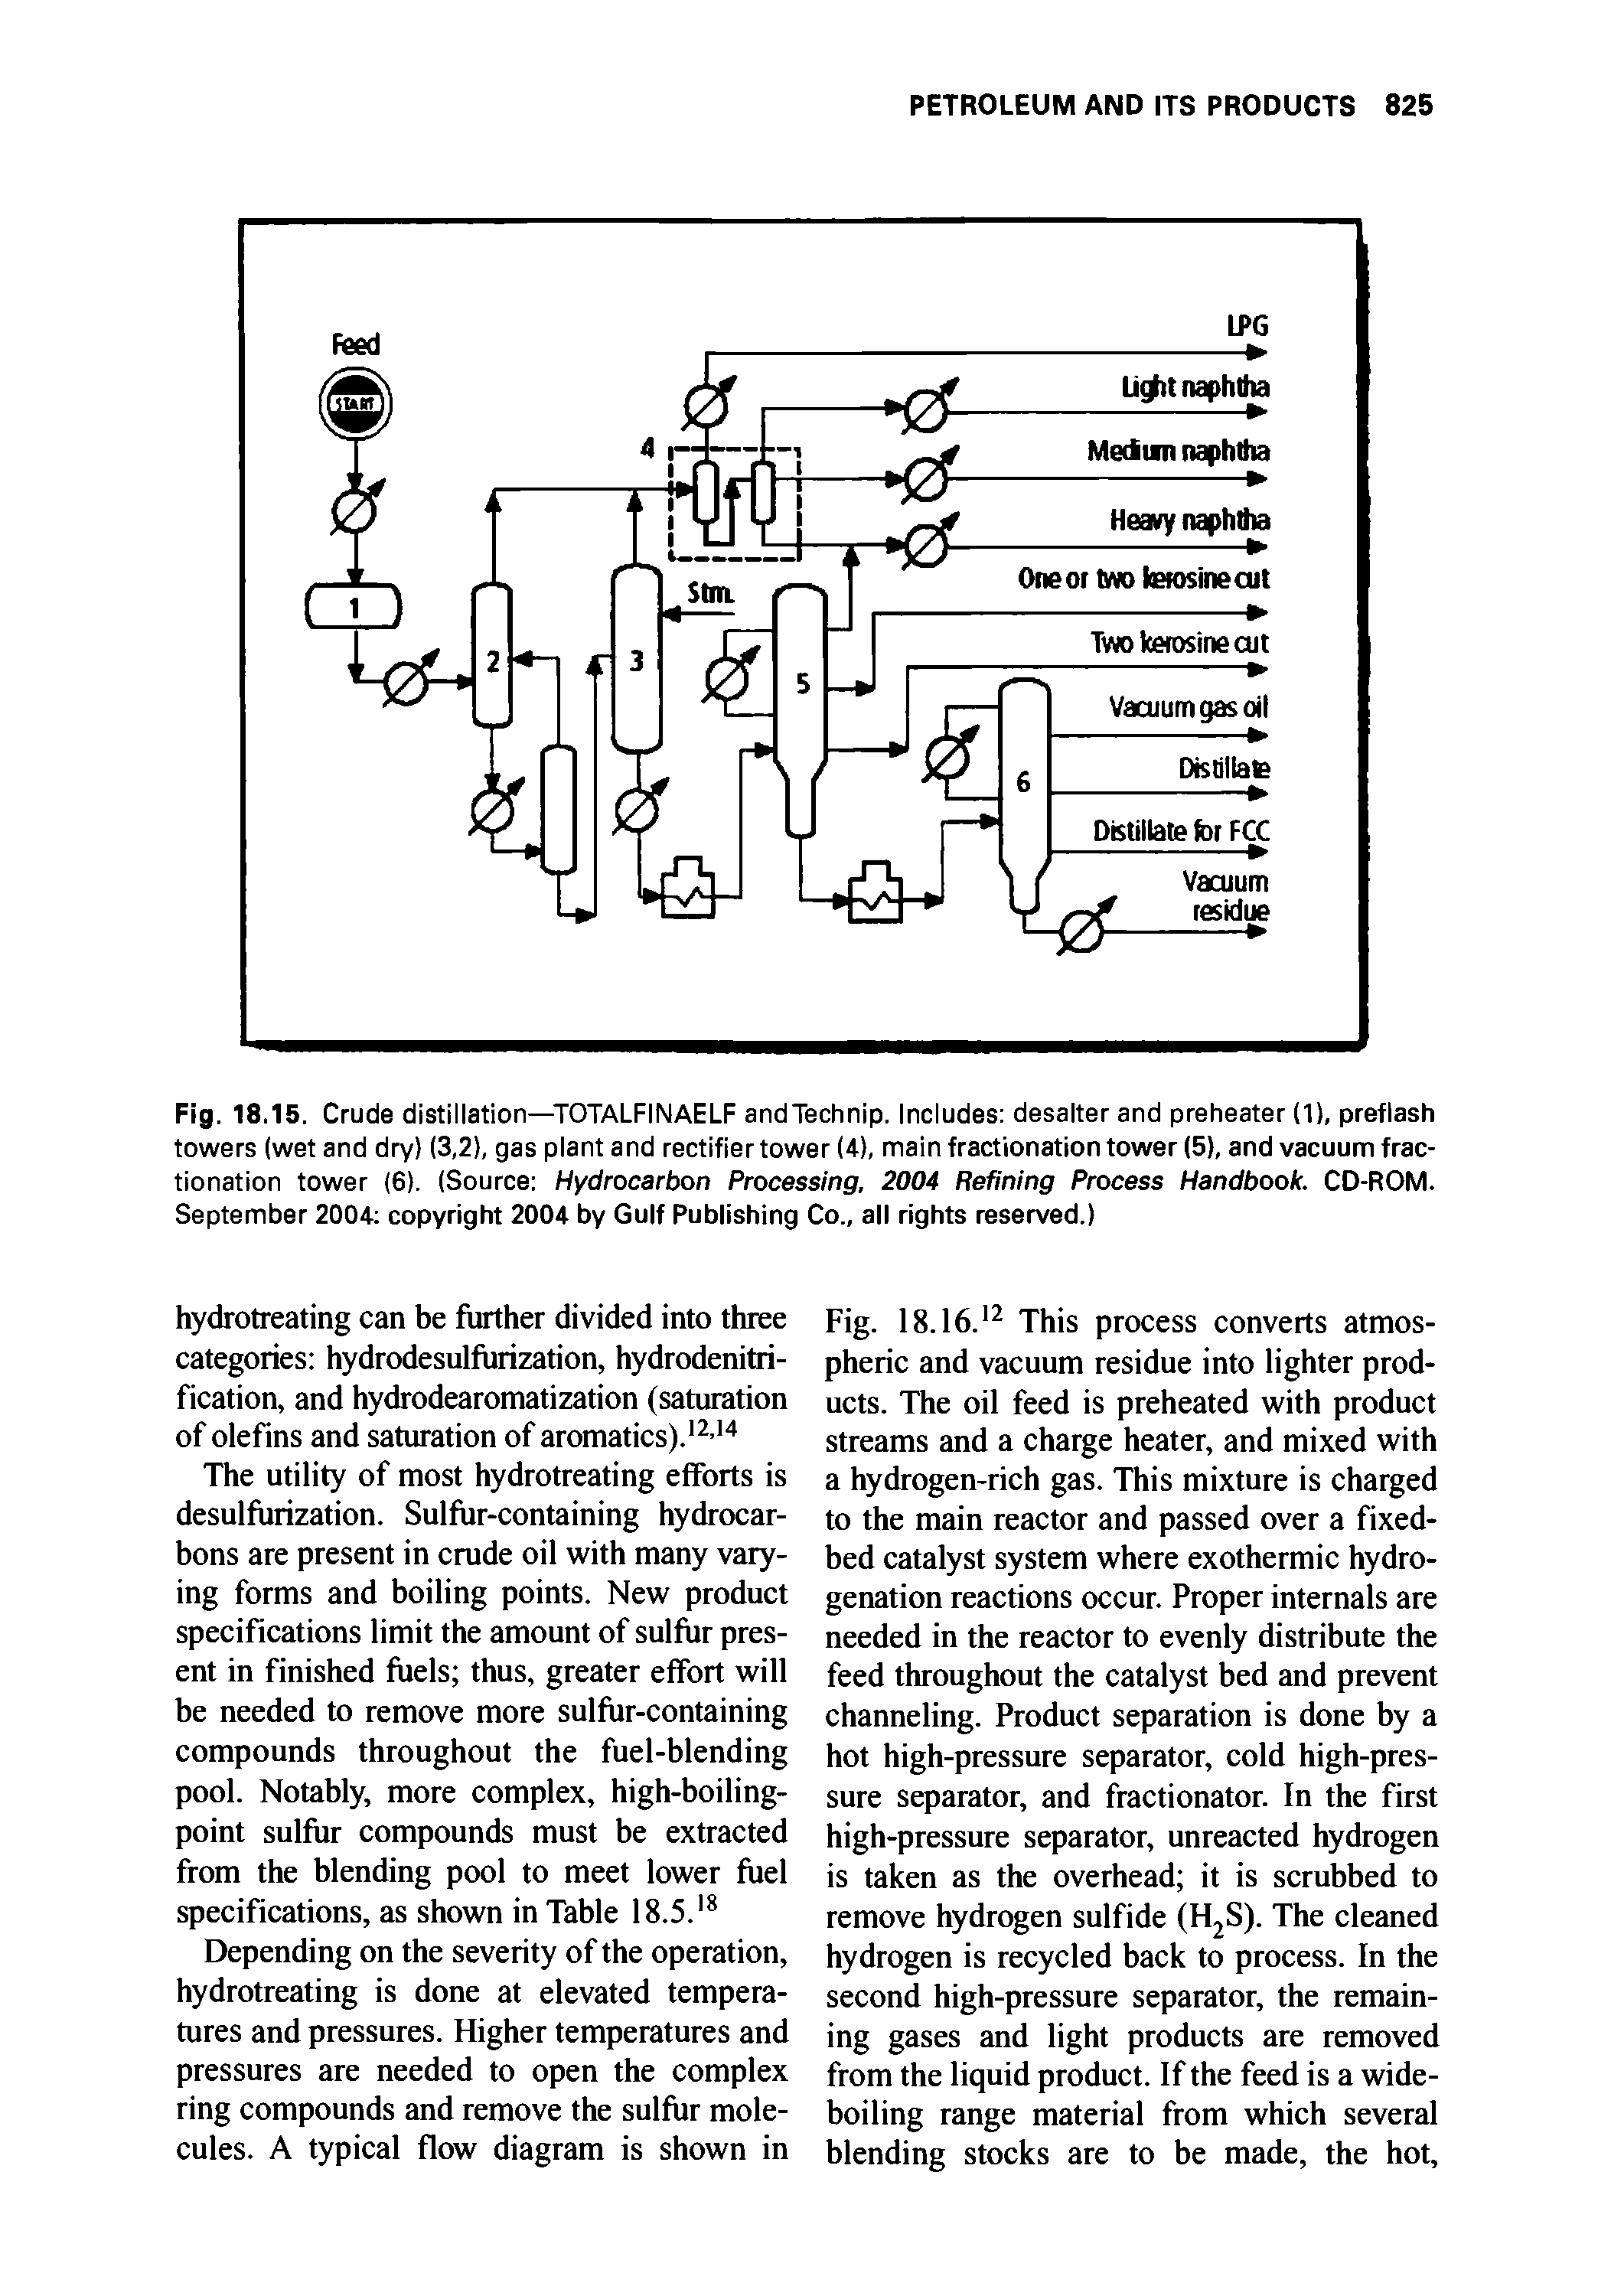 Fig. 18.15. Crude distillation—TOTALFINAELF andTechnip. Includes desalter and preheater (1), preflash towers (wet and dry) (3,2), gas plant and rectifier tower (4), main fractionation tower (5), and vacuum fractionation tower (6). (Source Hydrocarbon Processing, 2004 Refining Process Handbook. CD-ROM. September 2004 copyright 2004 by Gulf Publishing Co., all rights reserved.)...